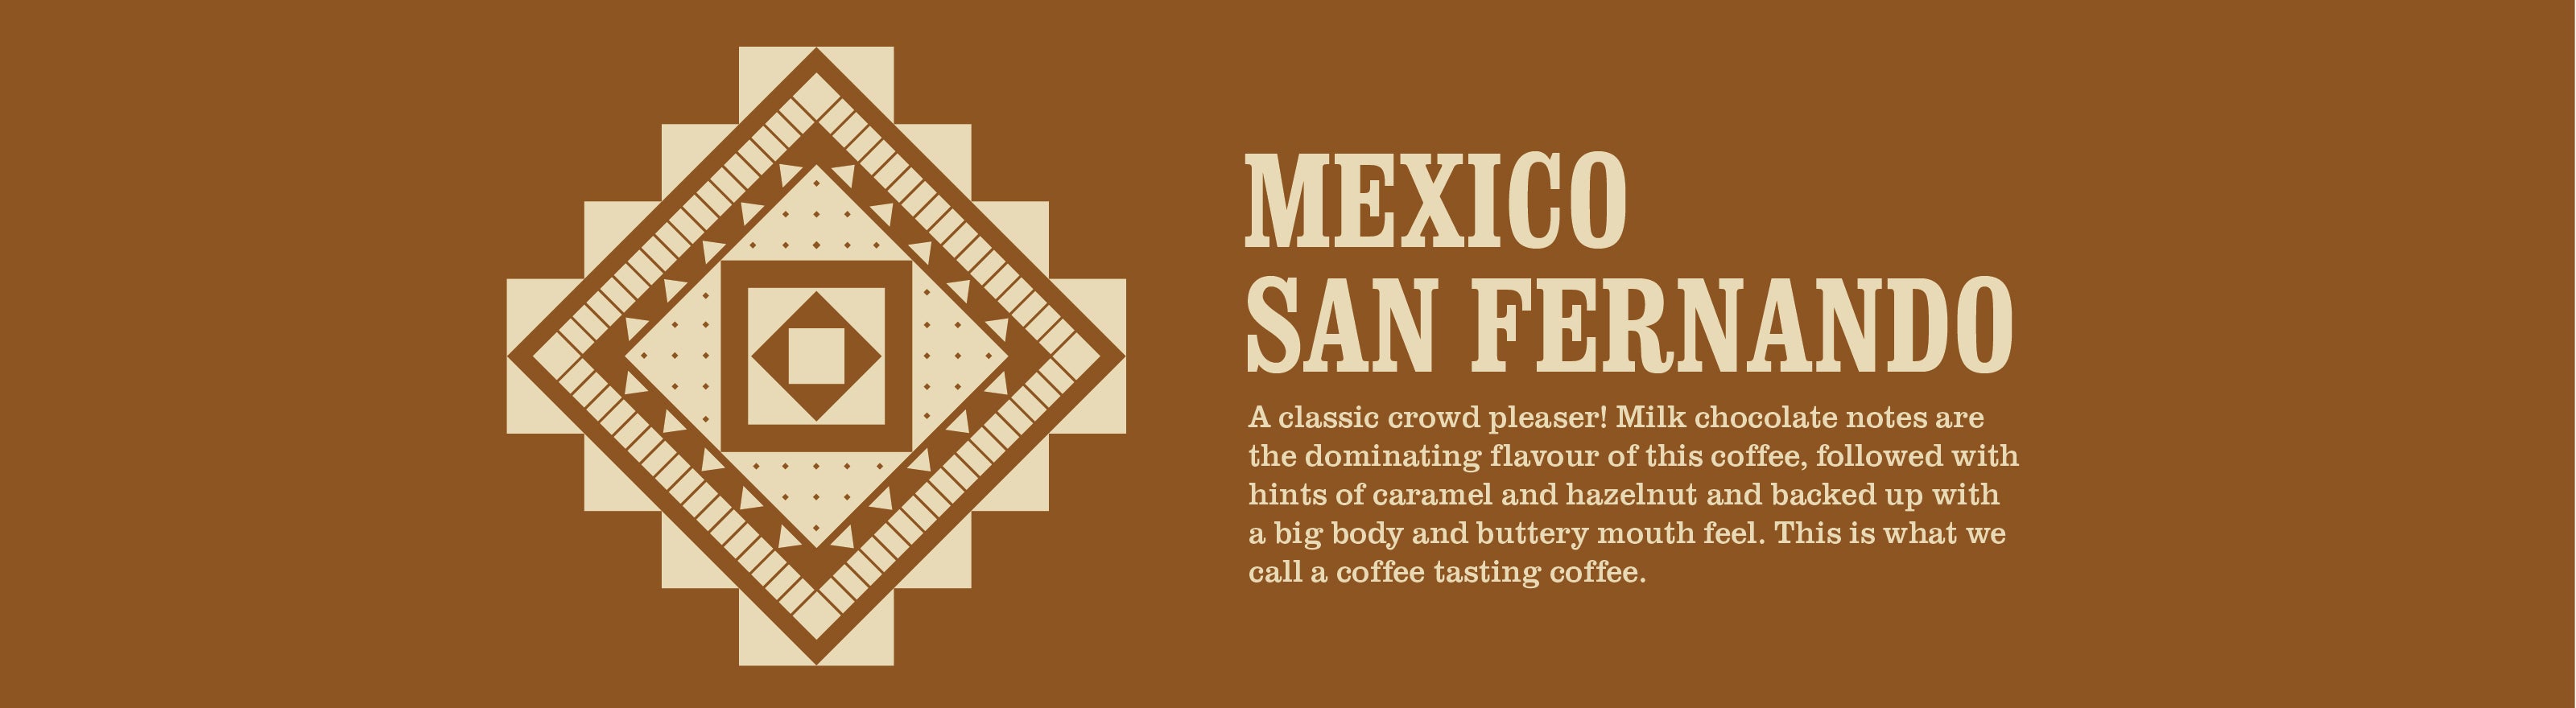 mexico coffee informational image